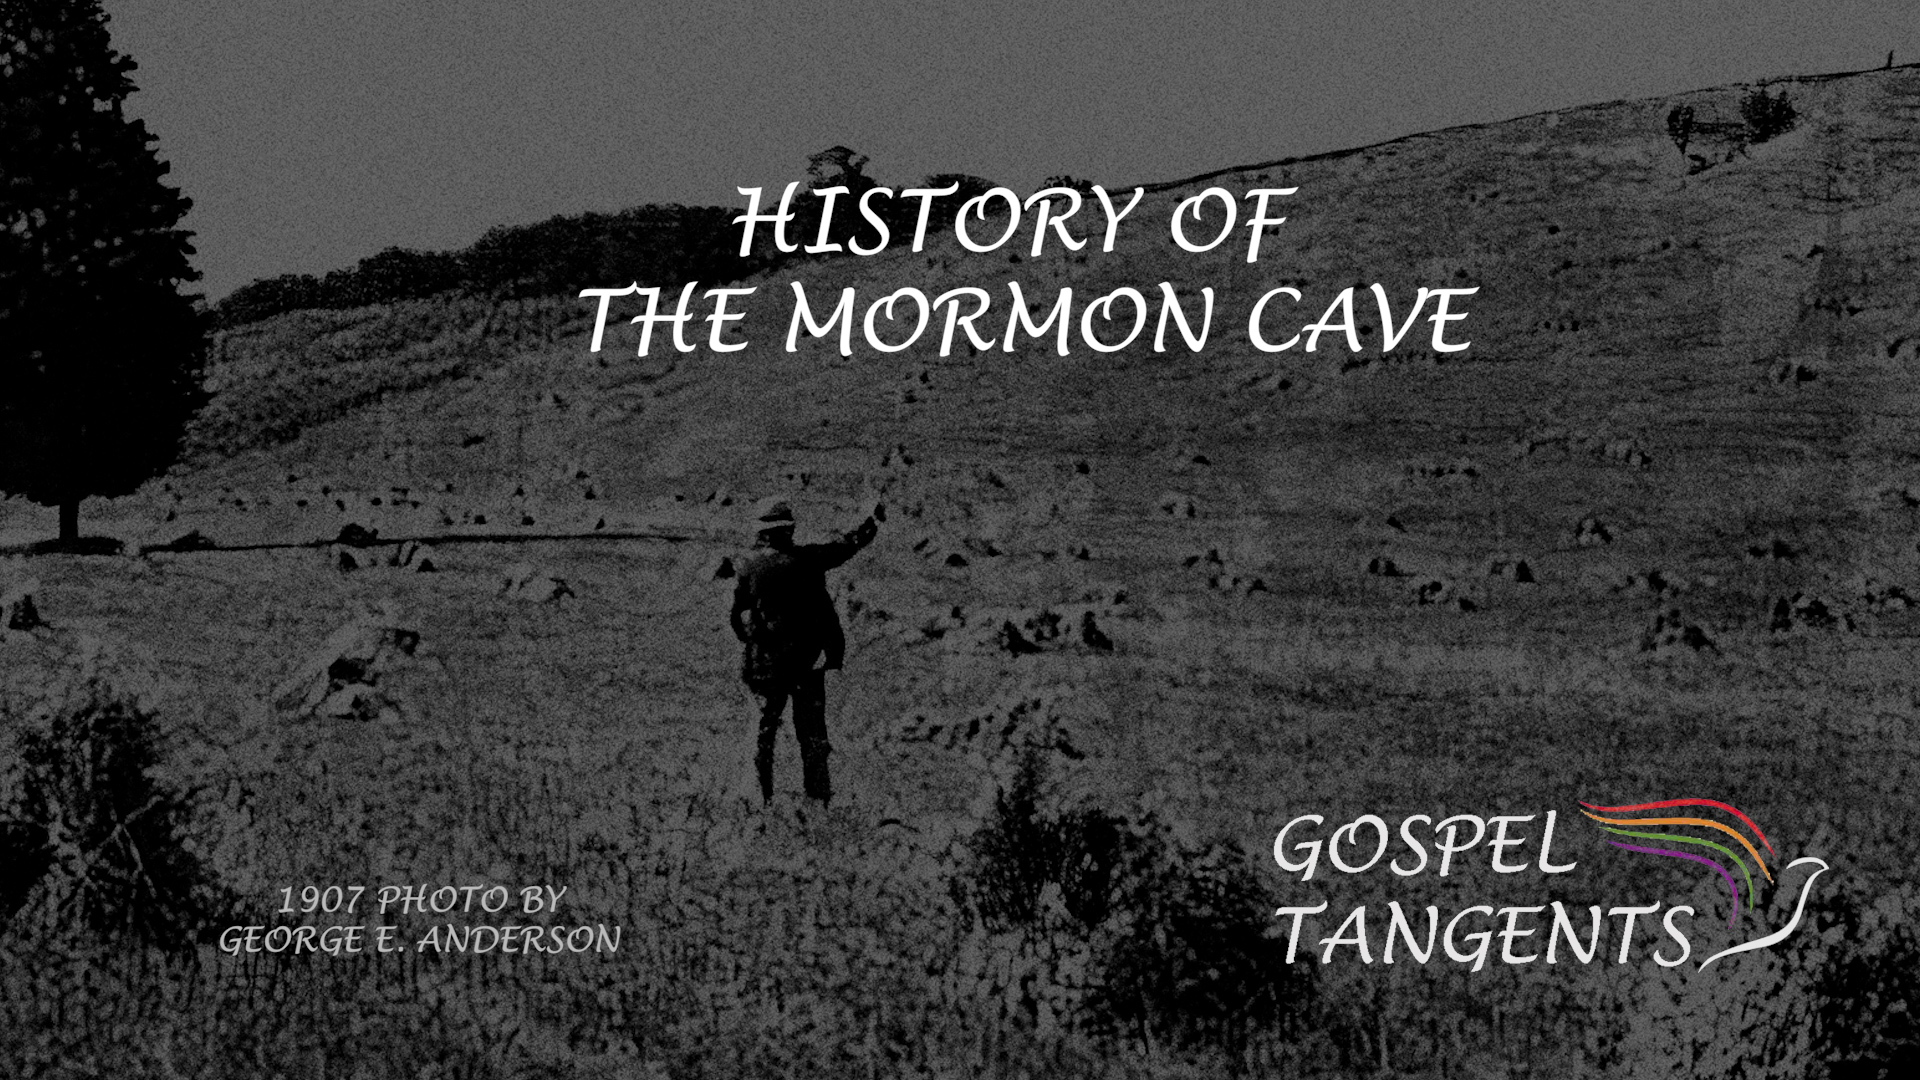 History of the Cave - History of the Mormon Cave (Part 2 of 6) - Mormon History Podcast